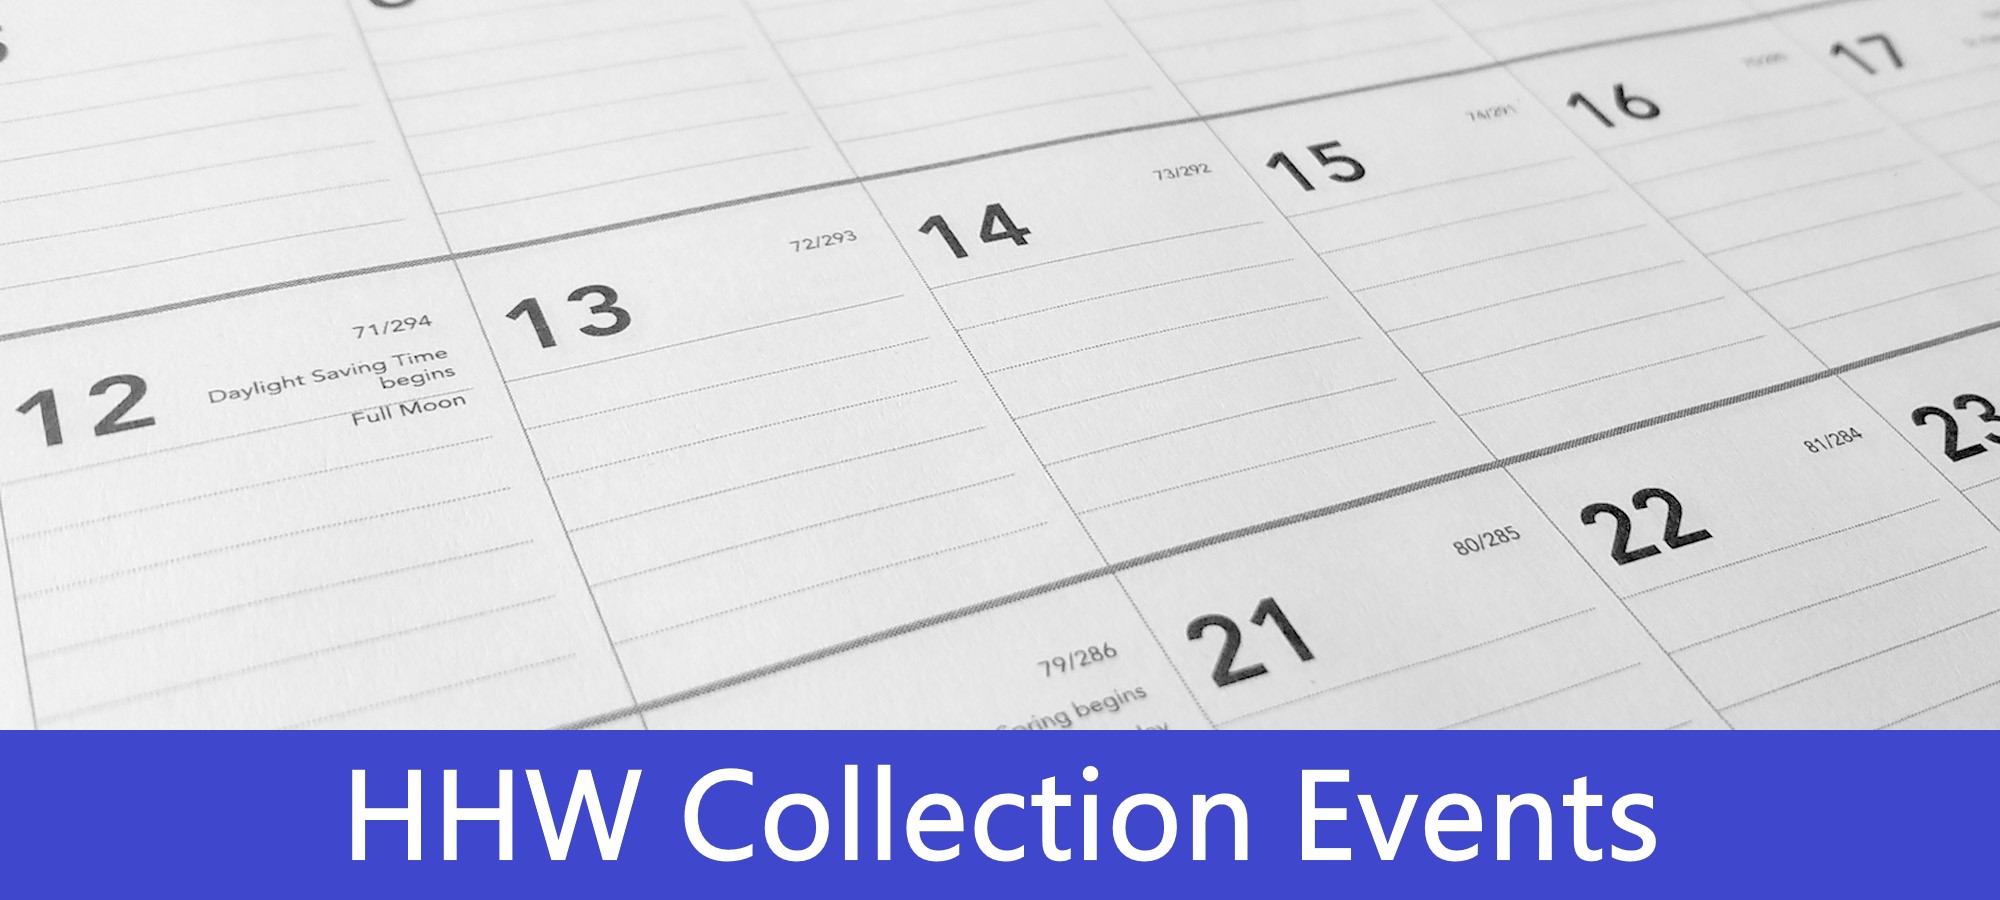 HHW Collection Events